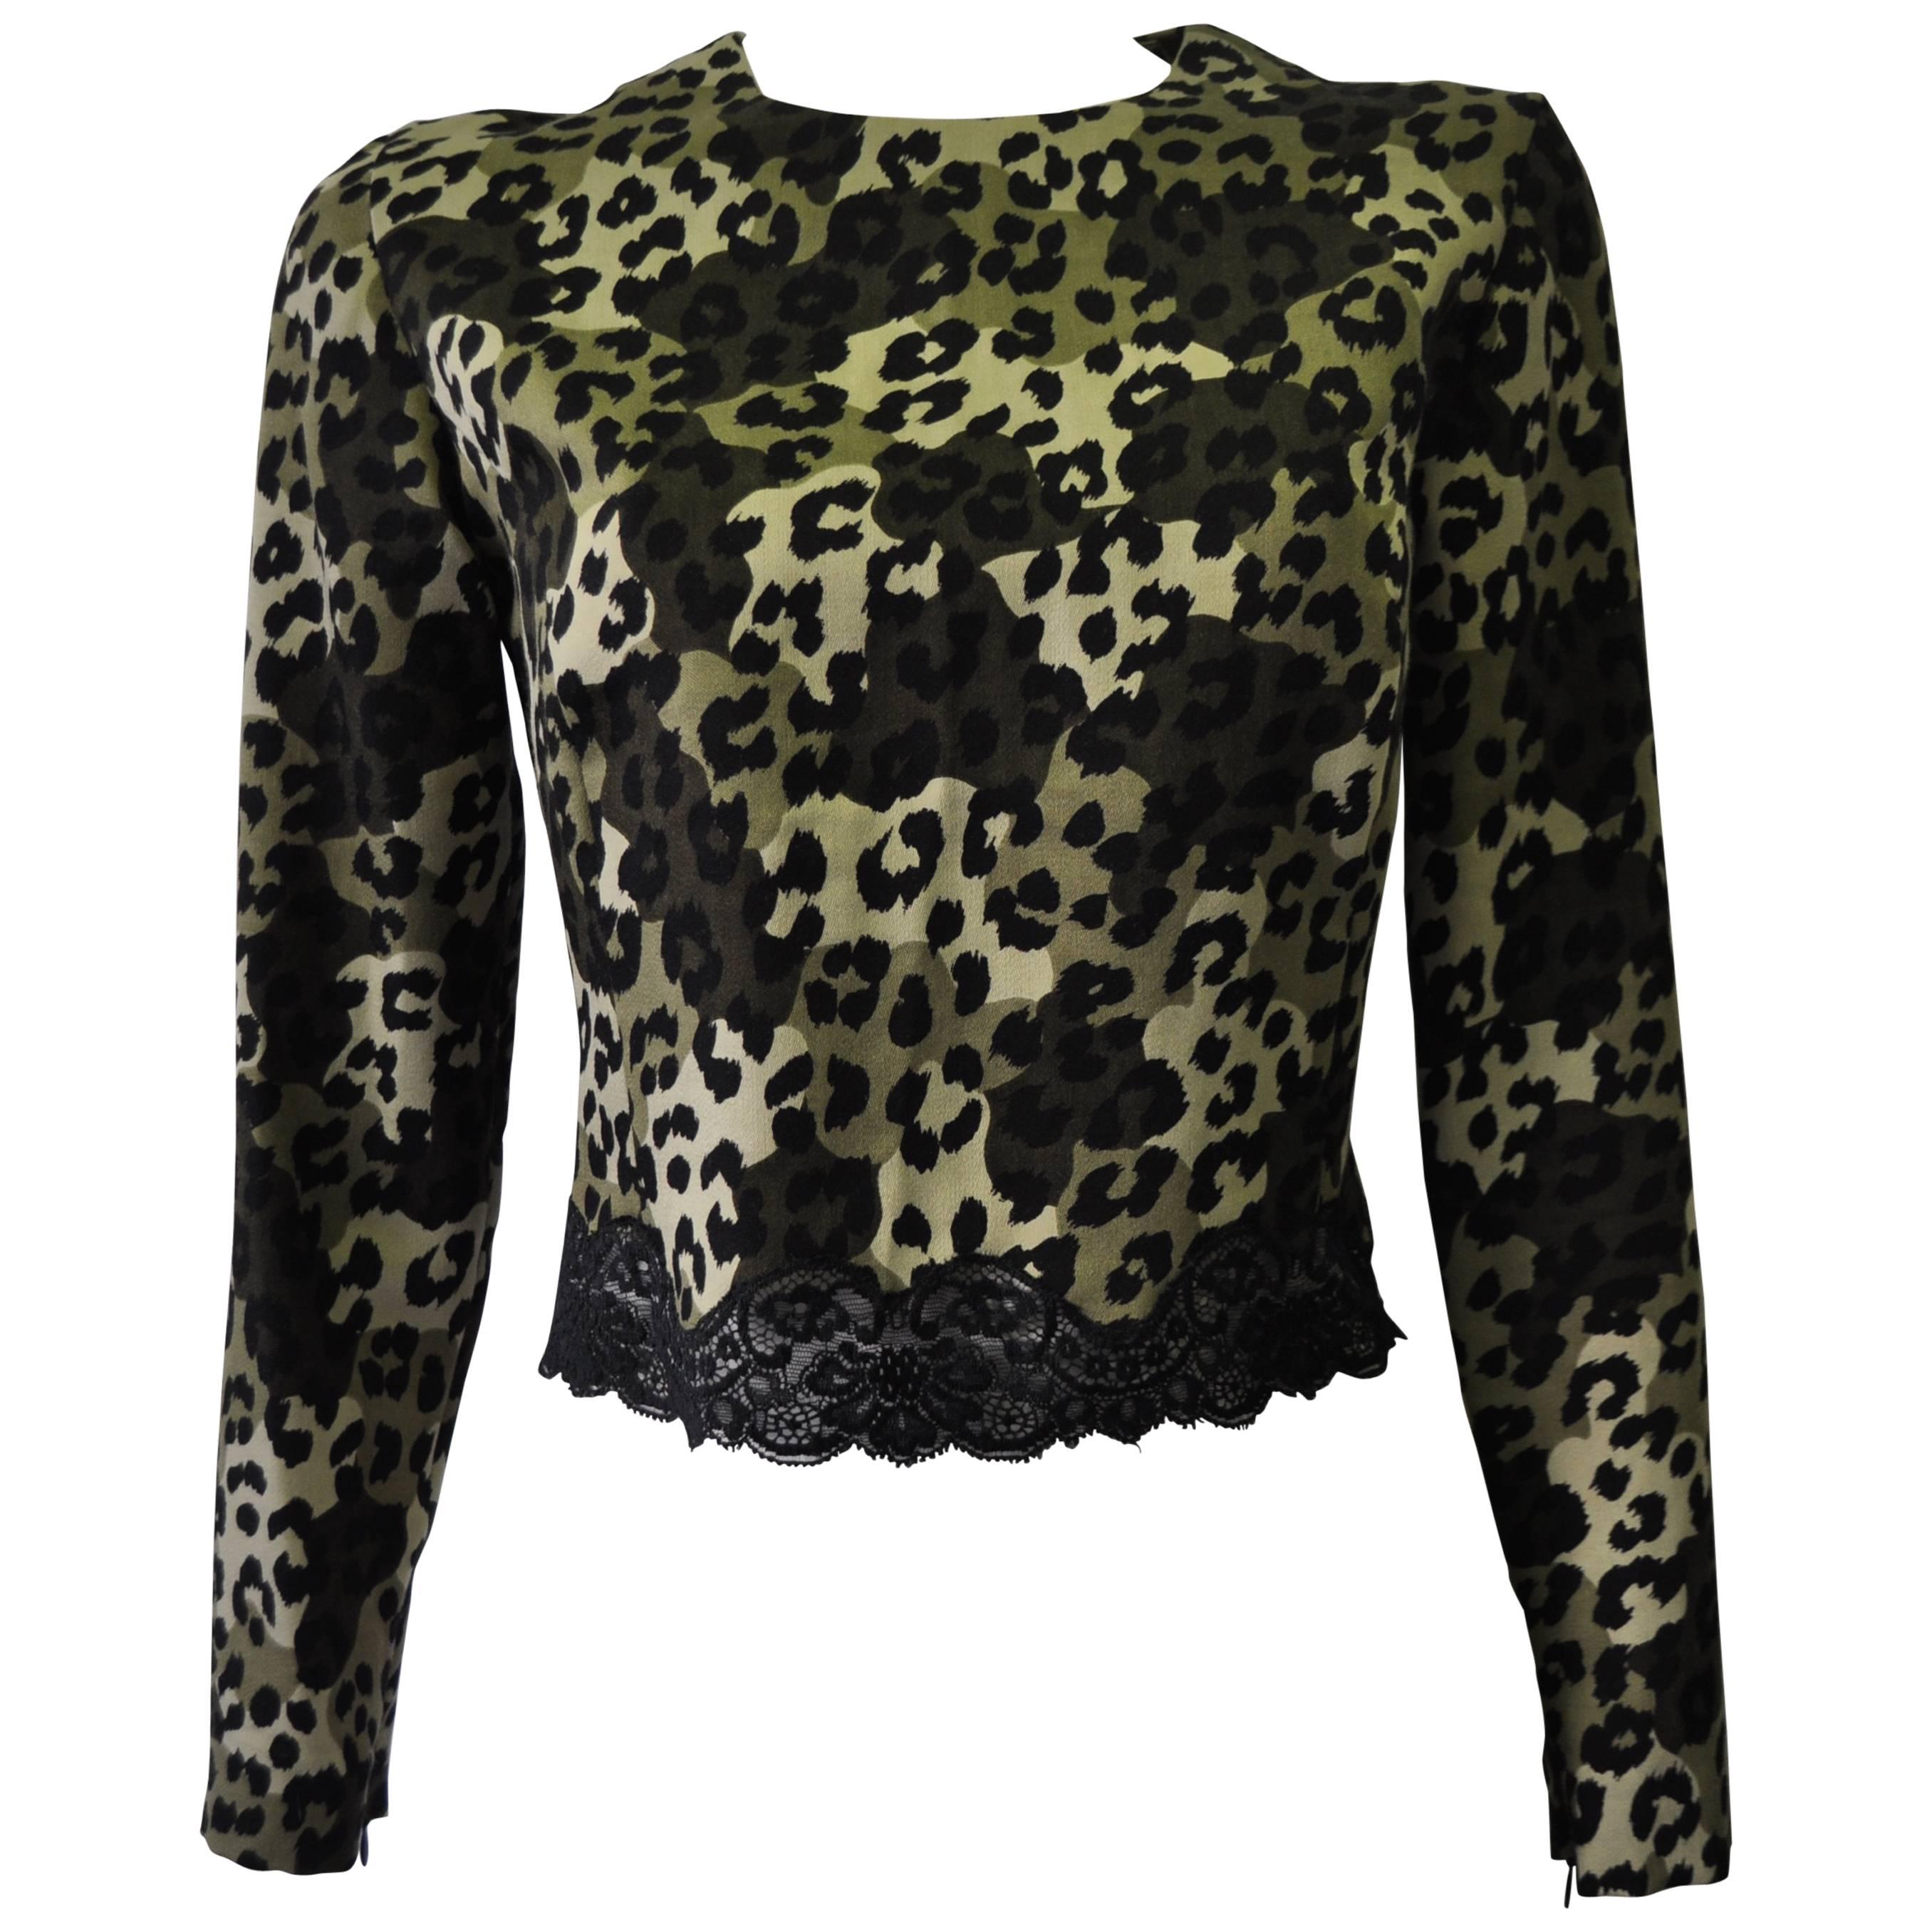 Gianni Versace Istante Leopard Camouflage Printed Lace Trim Top For Sale